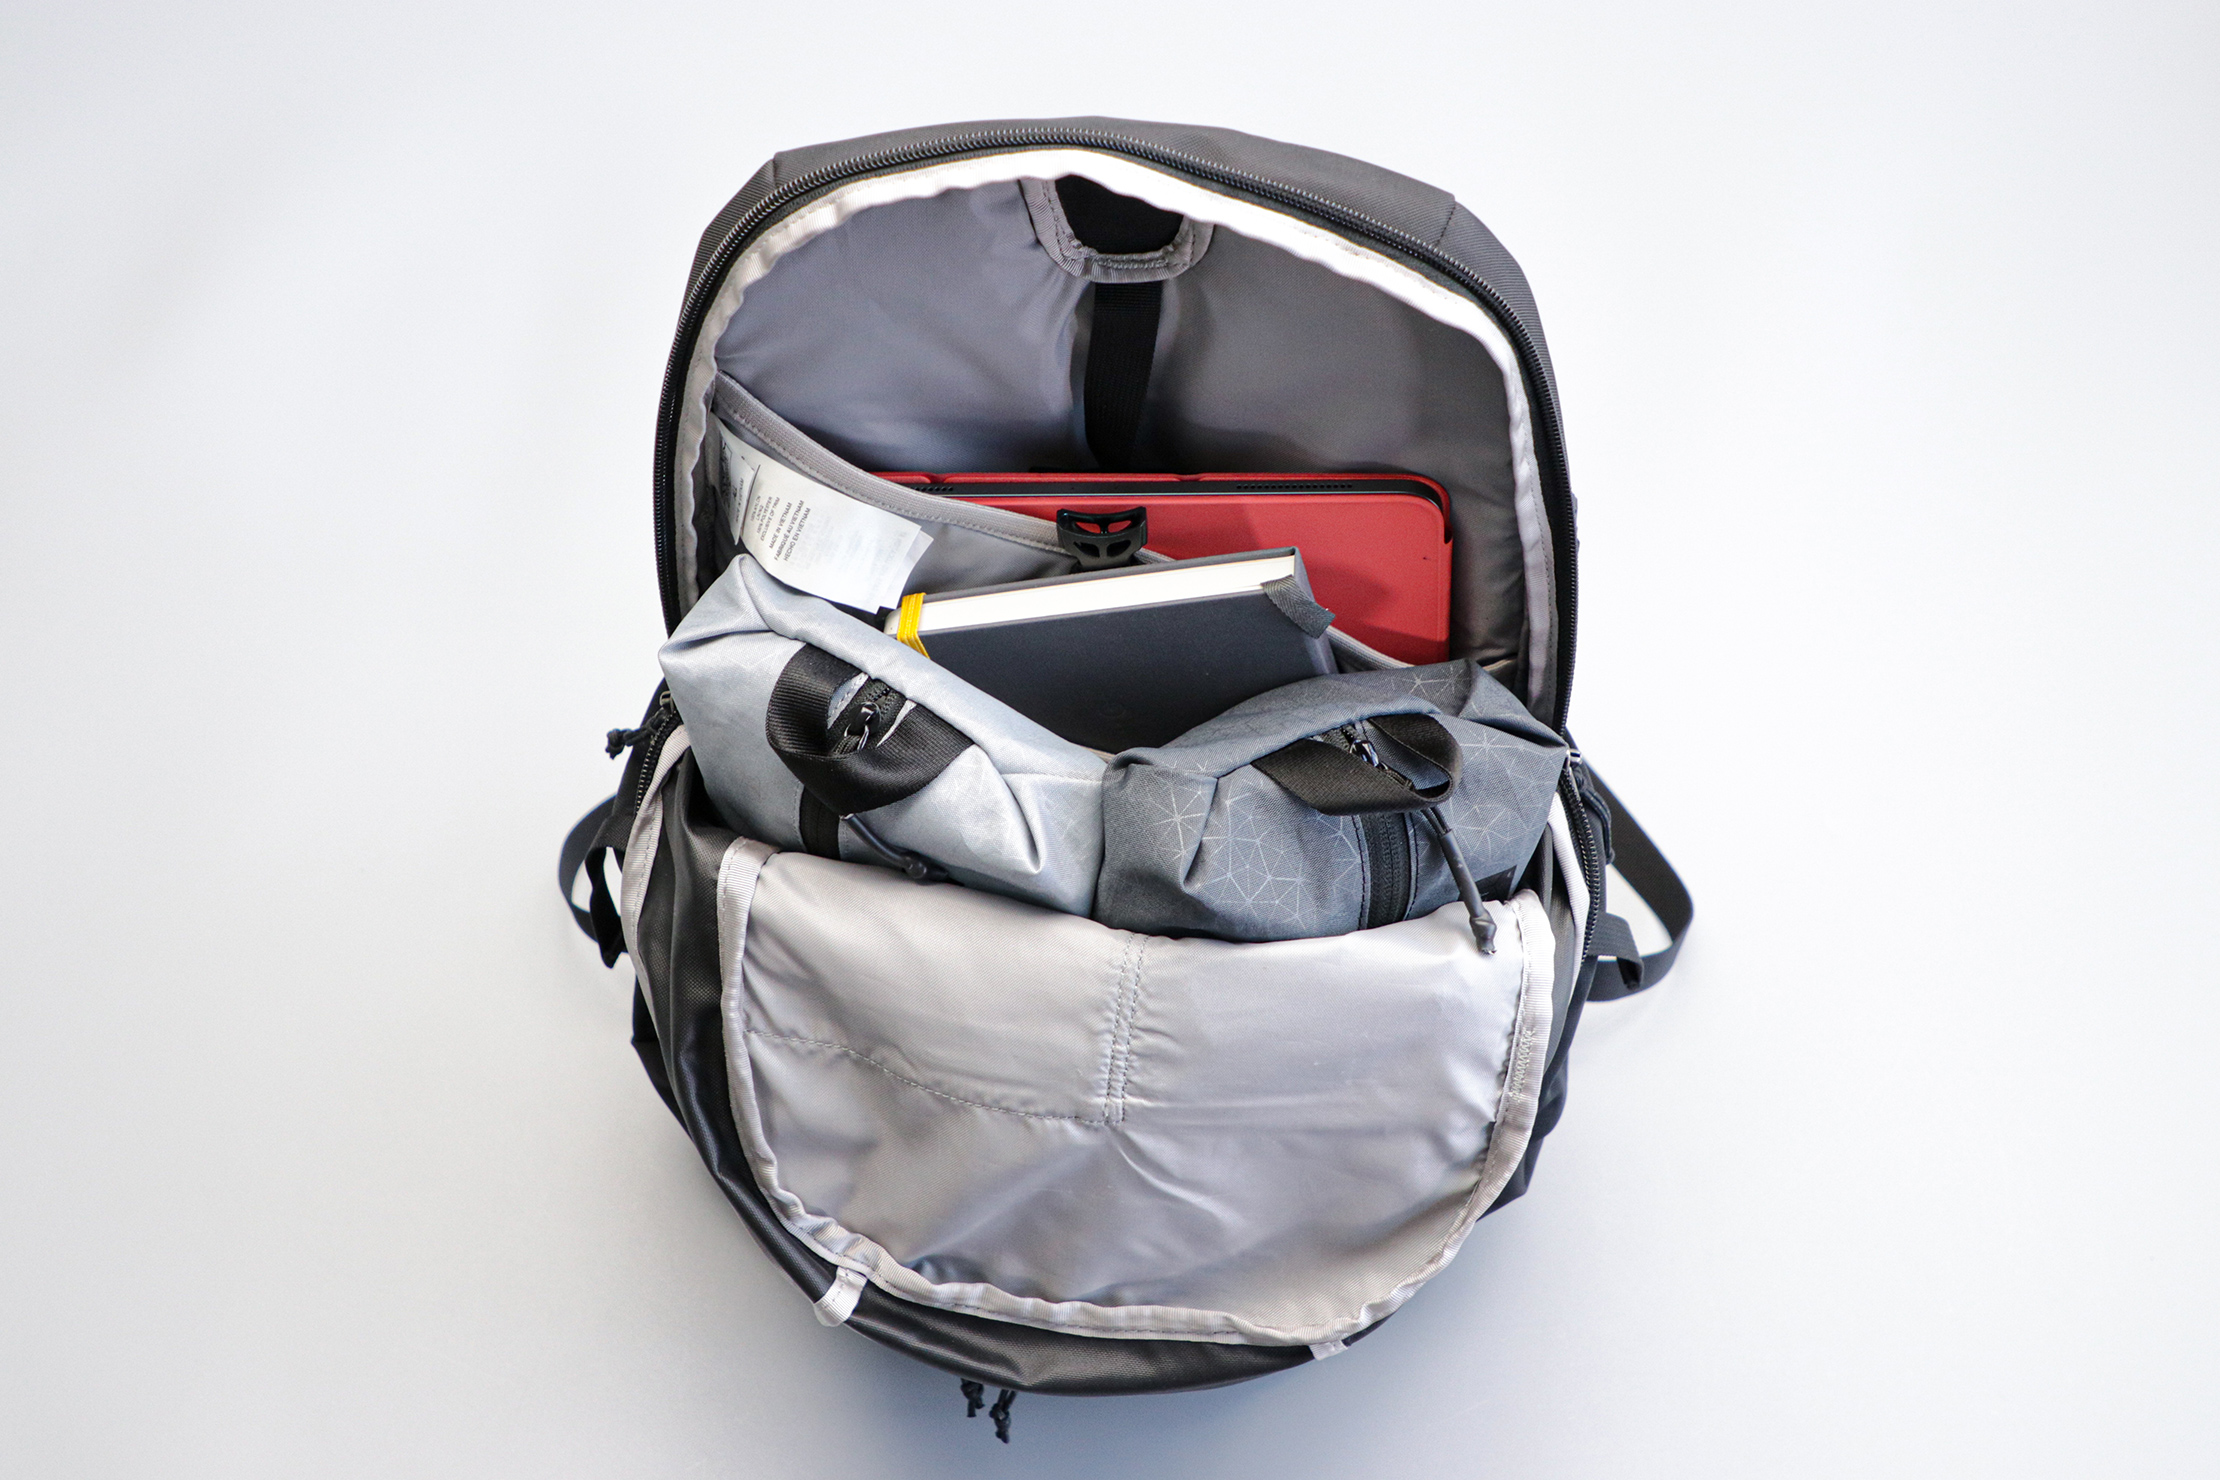 Patagonia Refugio Backpack main compartment